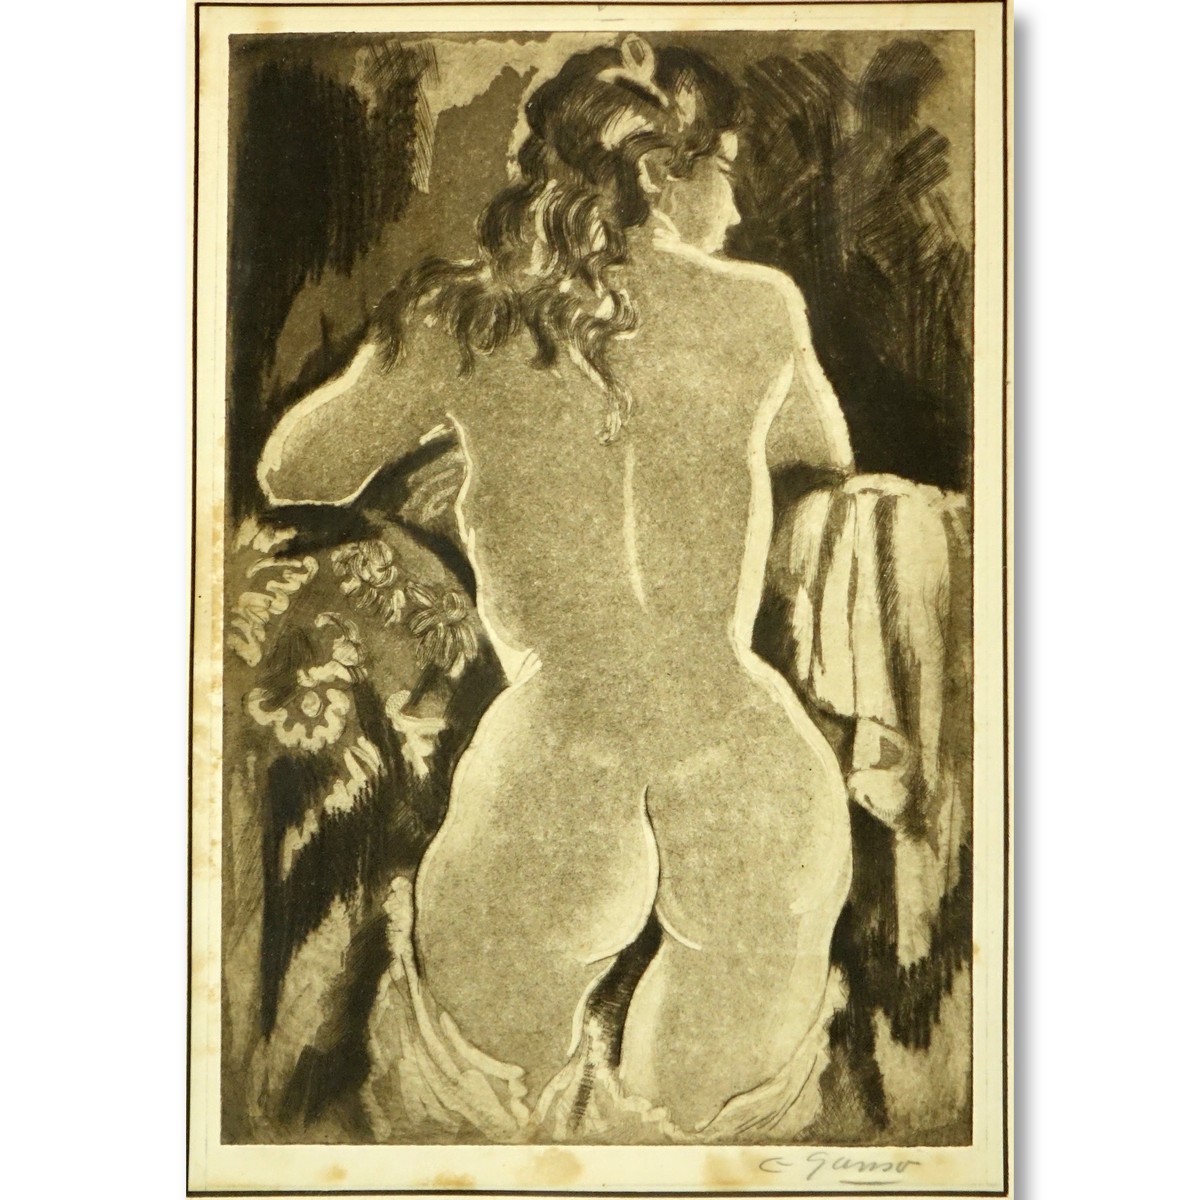 20th Century Etching "Nude". Signed in pencil lower right. Toning and foxing. Measures 11-3/4" x 7-